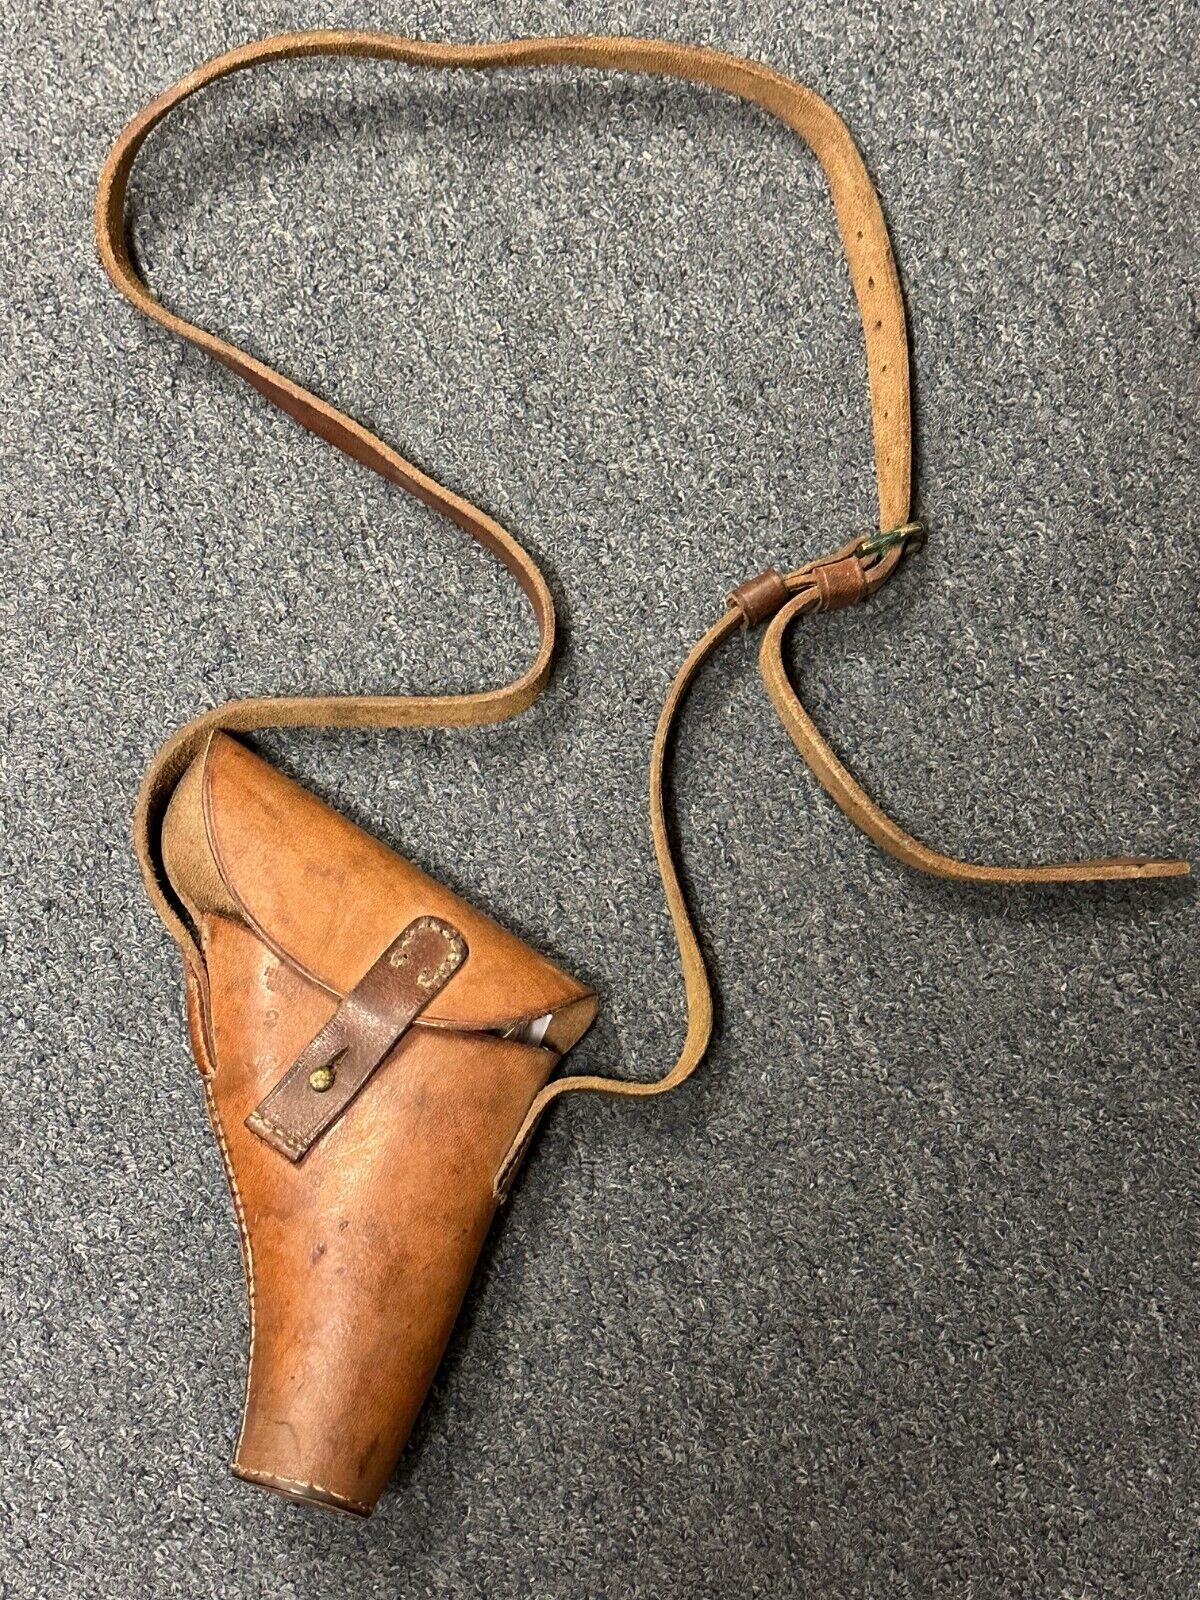 BRITISH WWII LEATHER HOLSTER WITH STRAP. DATED 1944.